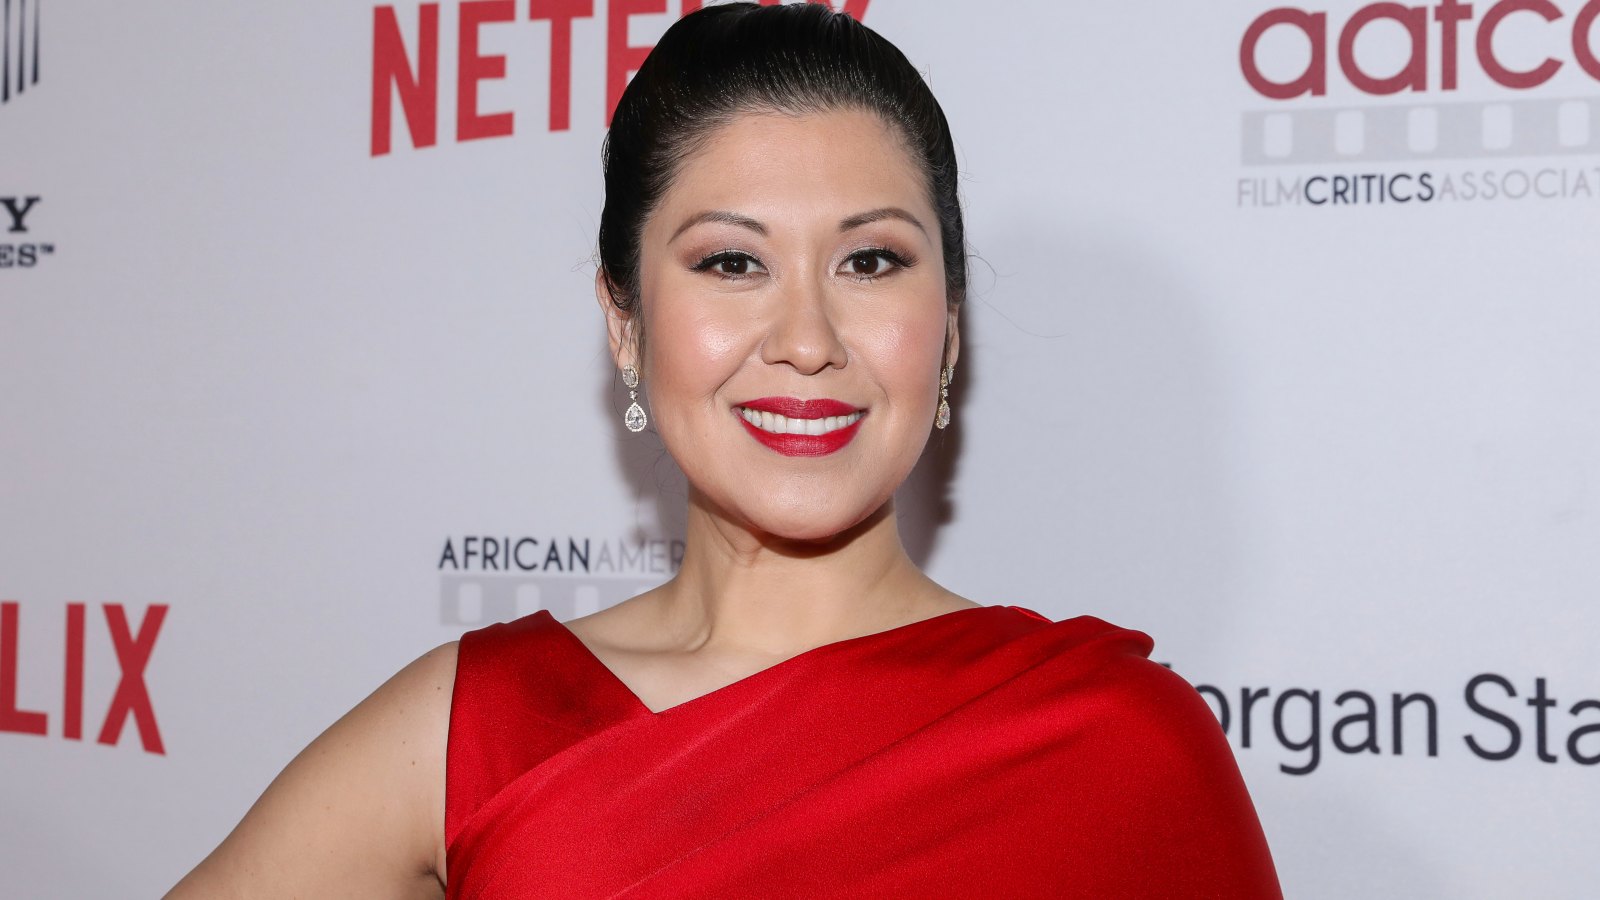 Broadway Star Ruthie Ann Miles Is Pregnant After Losing Unborn Baby and 4-Year-Old Daughter